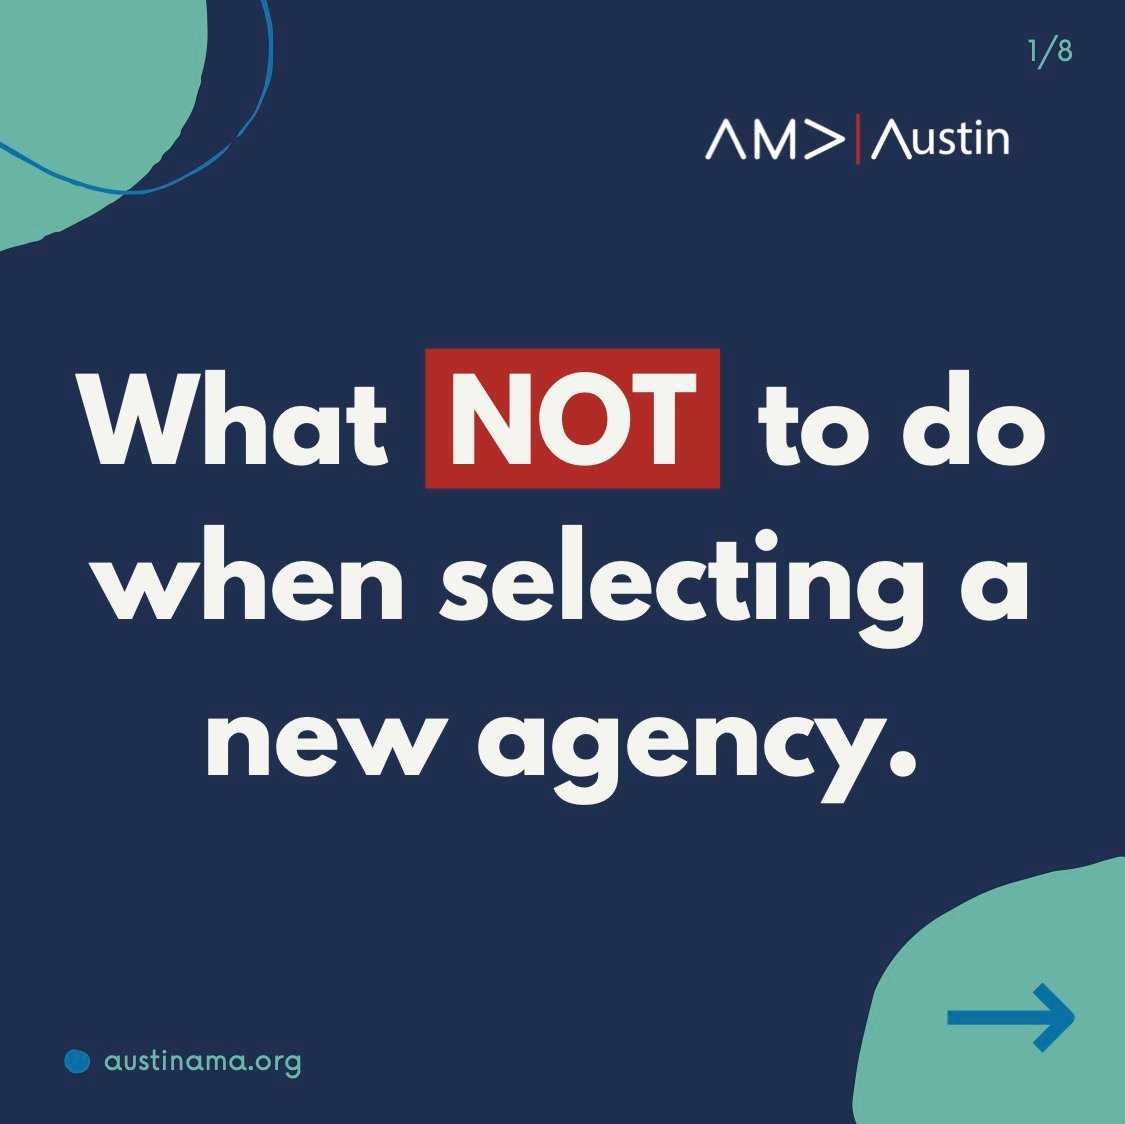 What NOT to do when selecting a new agency - 1